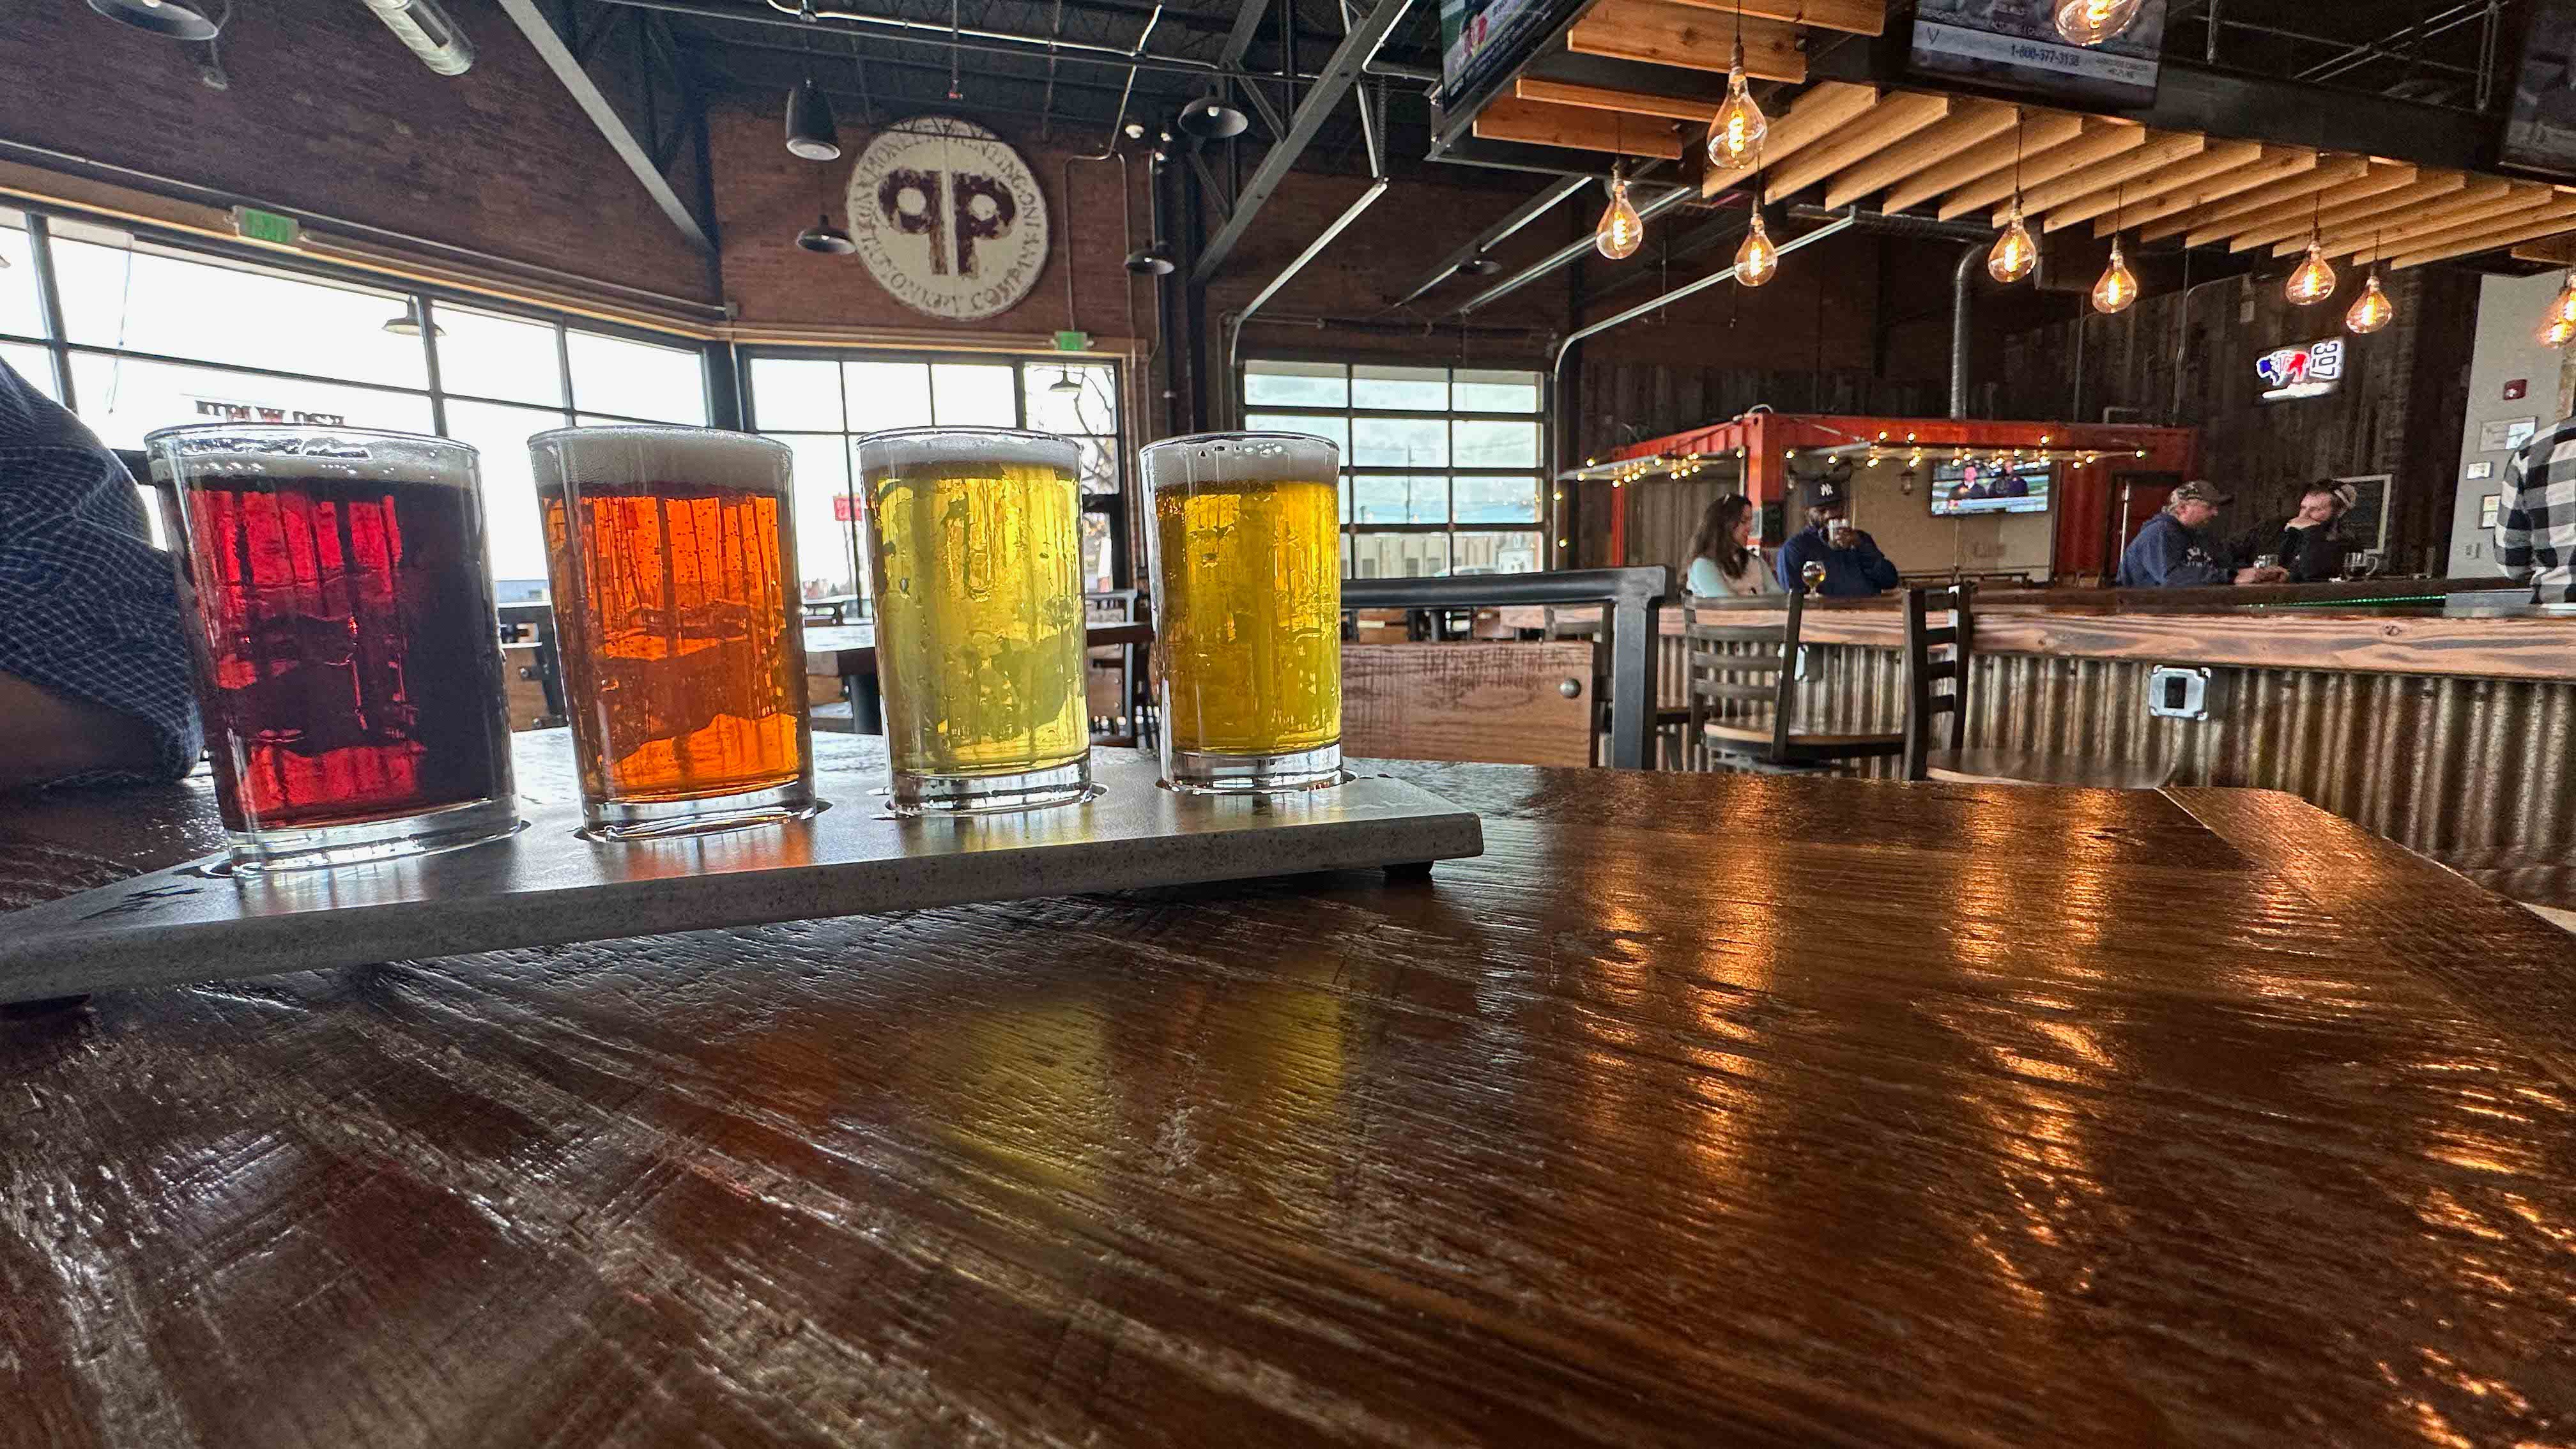 Black Tooth Brewing Company’s Cheyenne location is in a building that formerly housed a printing company.Photo Credit: Amber Leberman 